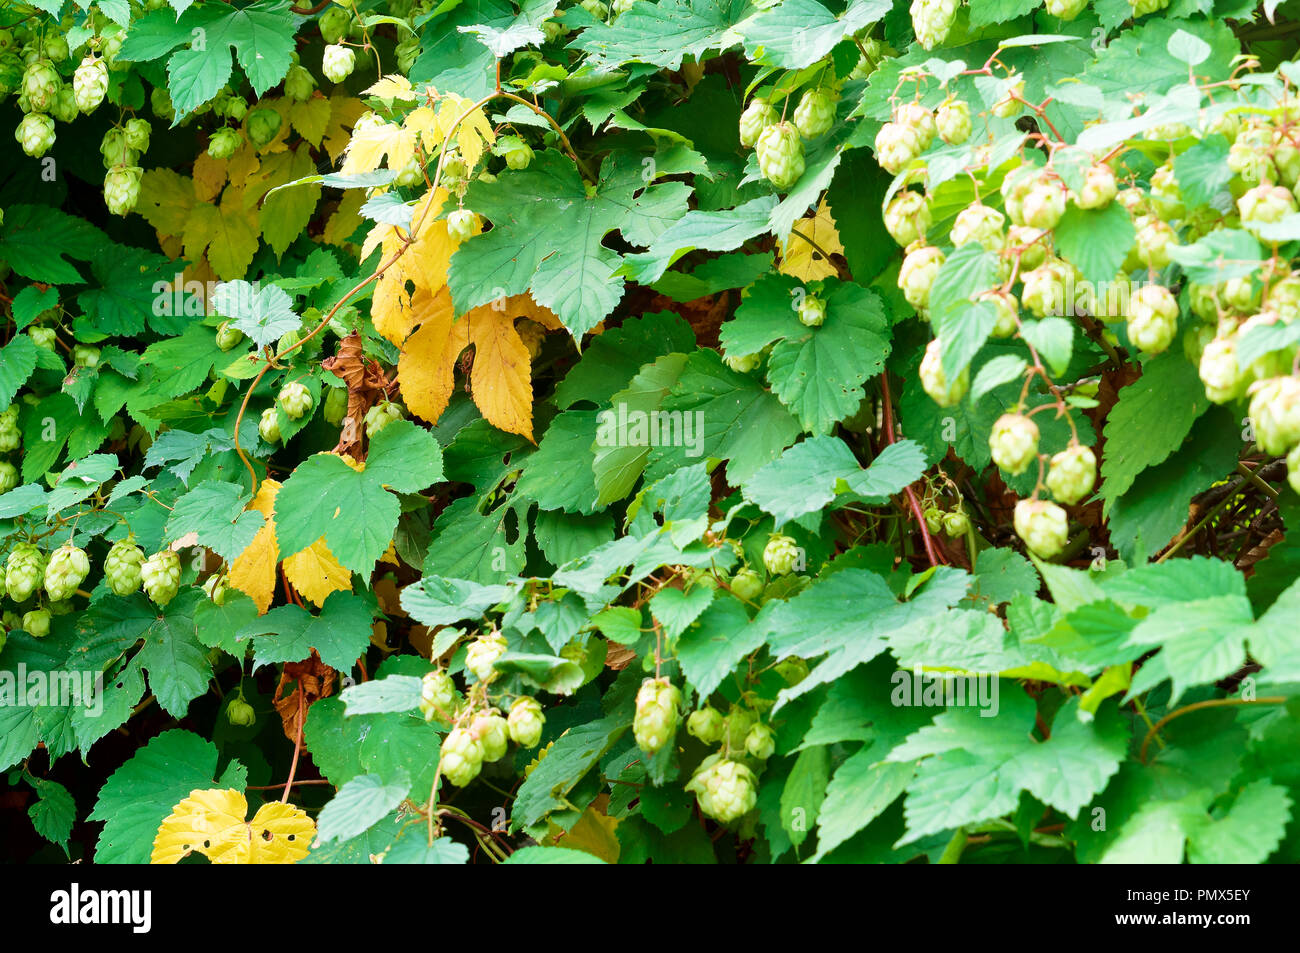 plant the hops are ripe, the fruit of a shrub hops Stock Photo